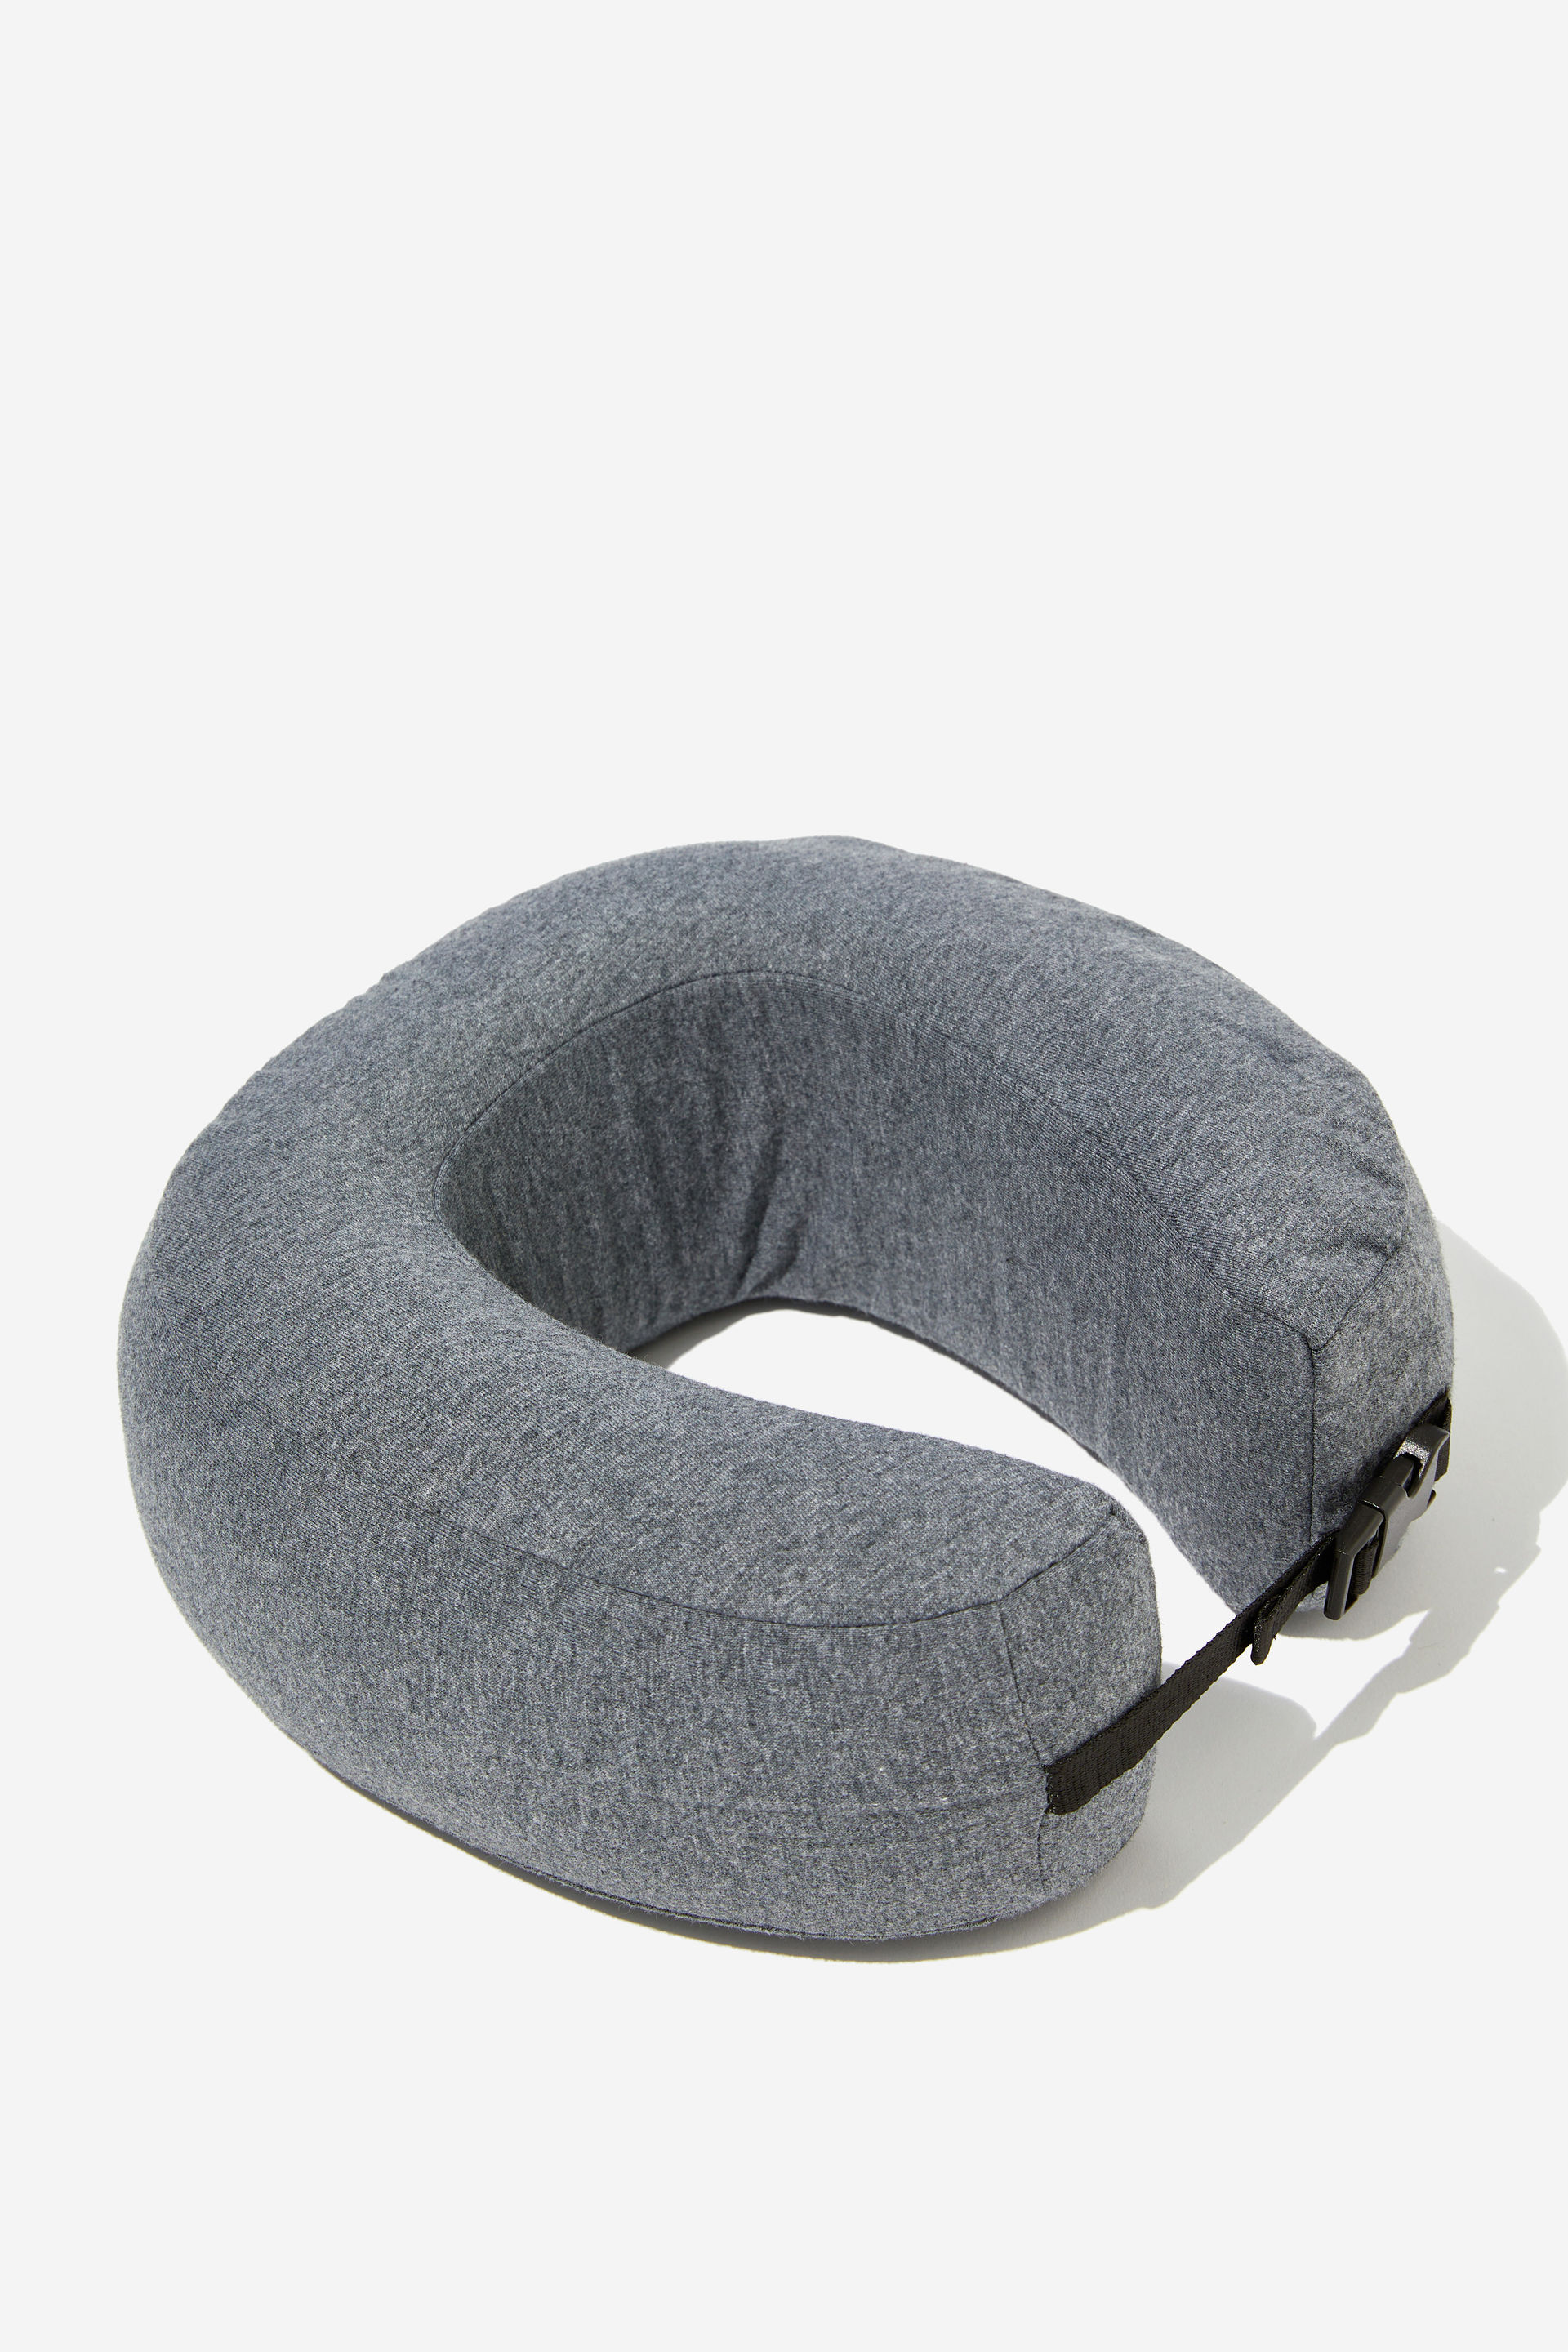 Typo - Foldable Travel Neck Pillow - Charcoal marle